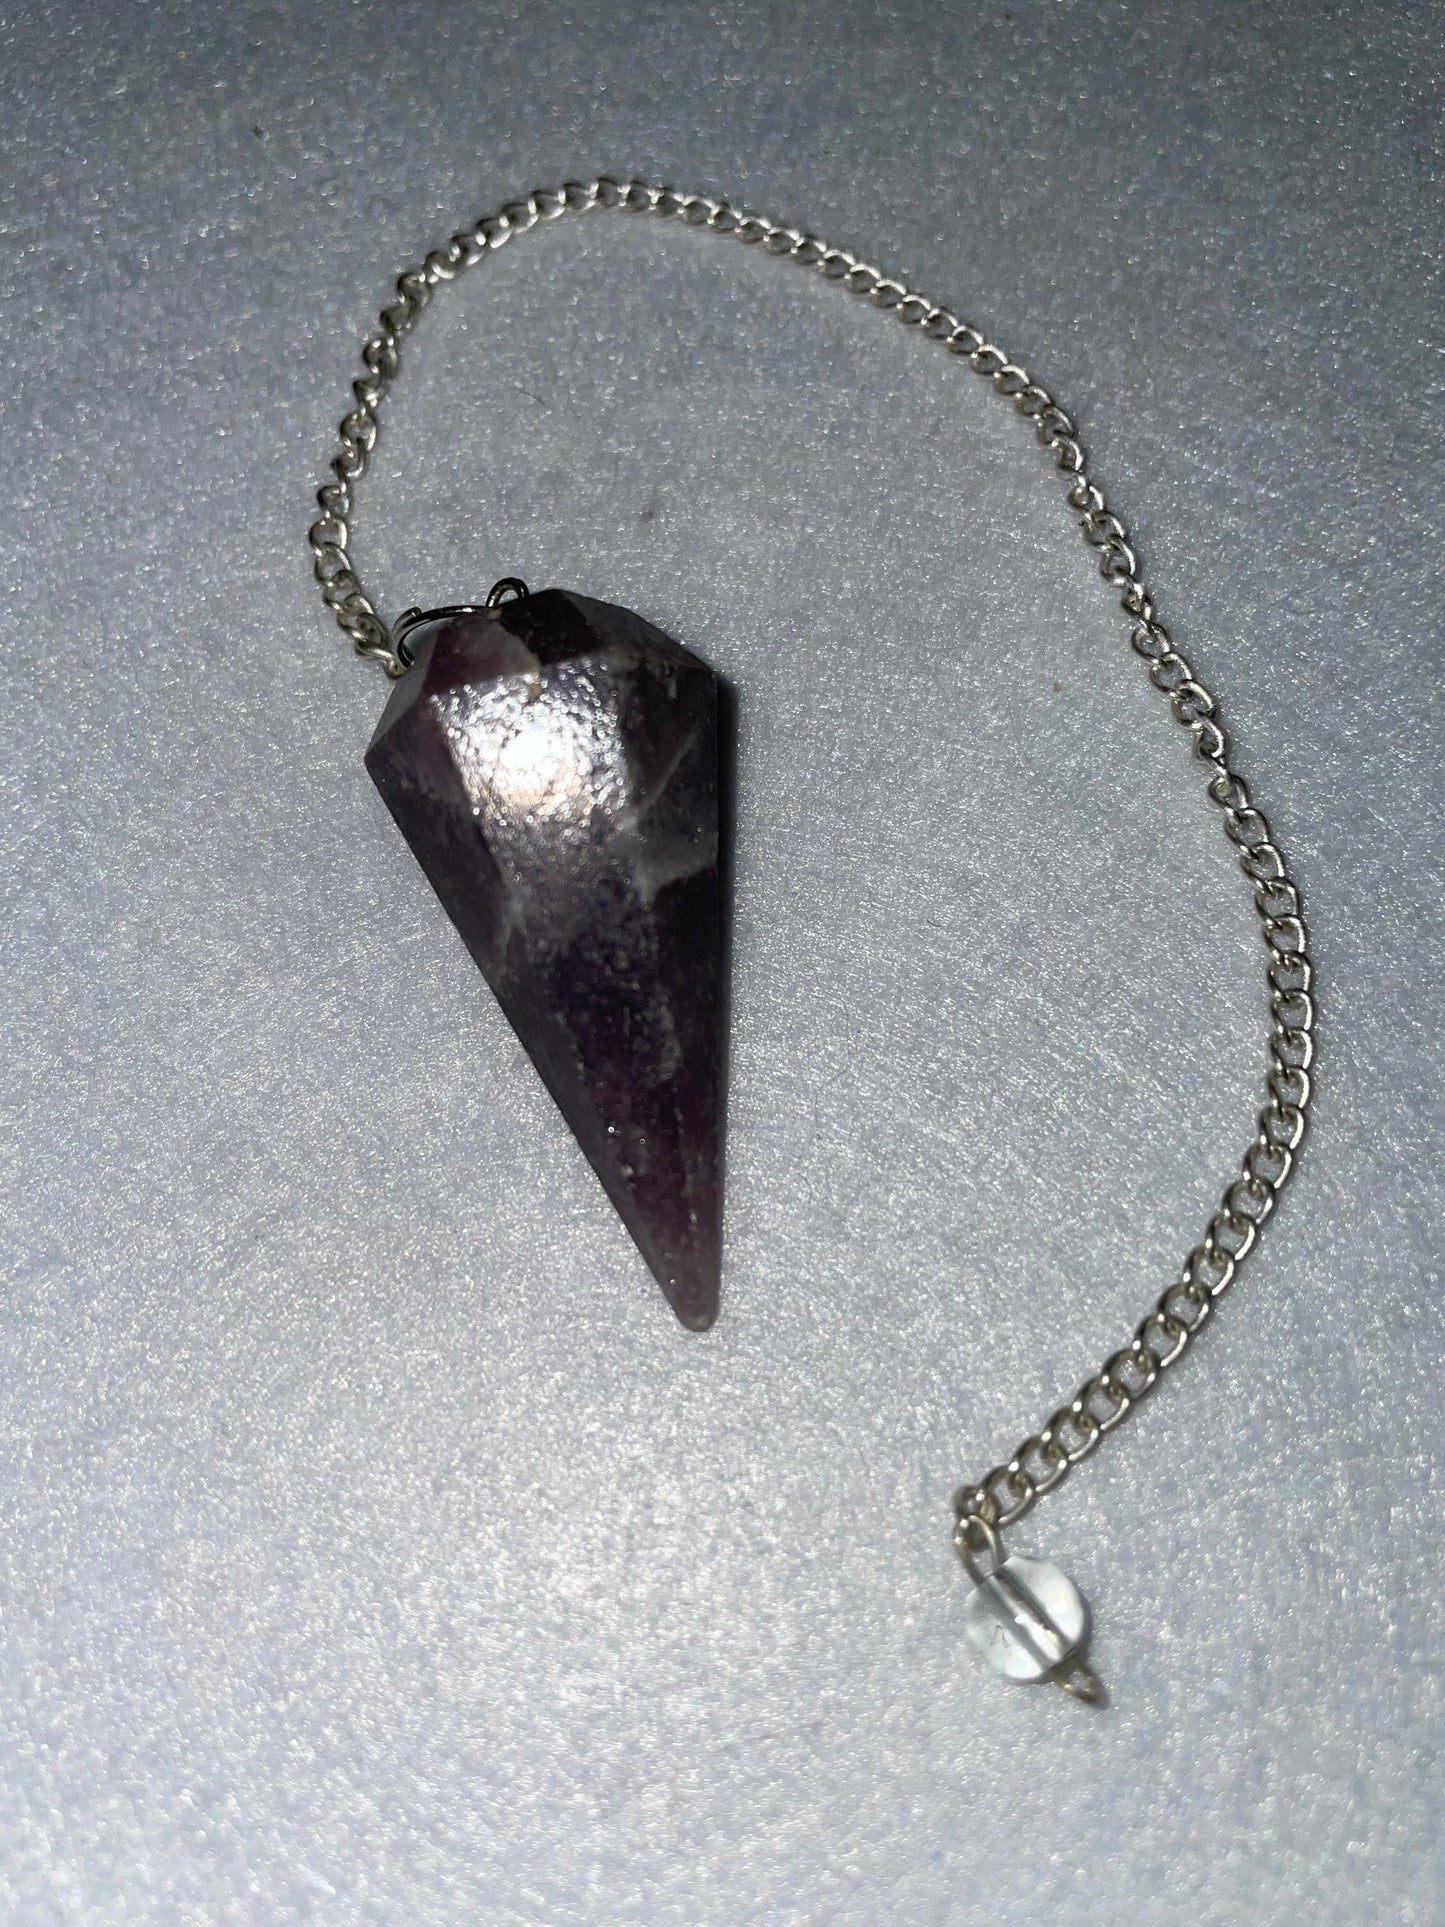 Lovely healing Amethyst Pendulum is  1.65” and with chain is 9.5”.